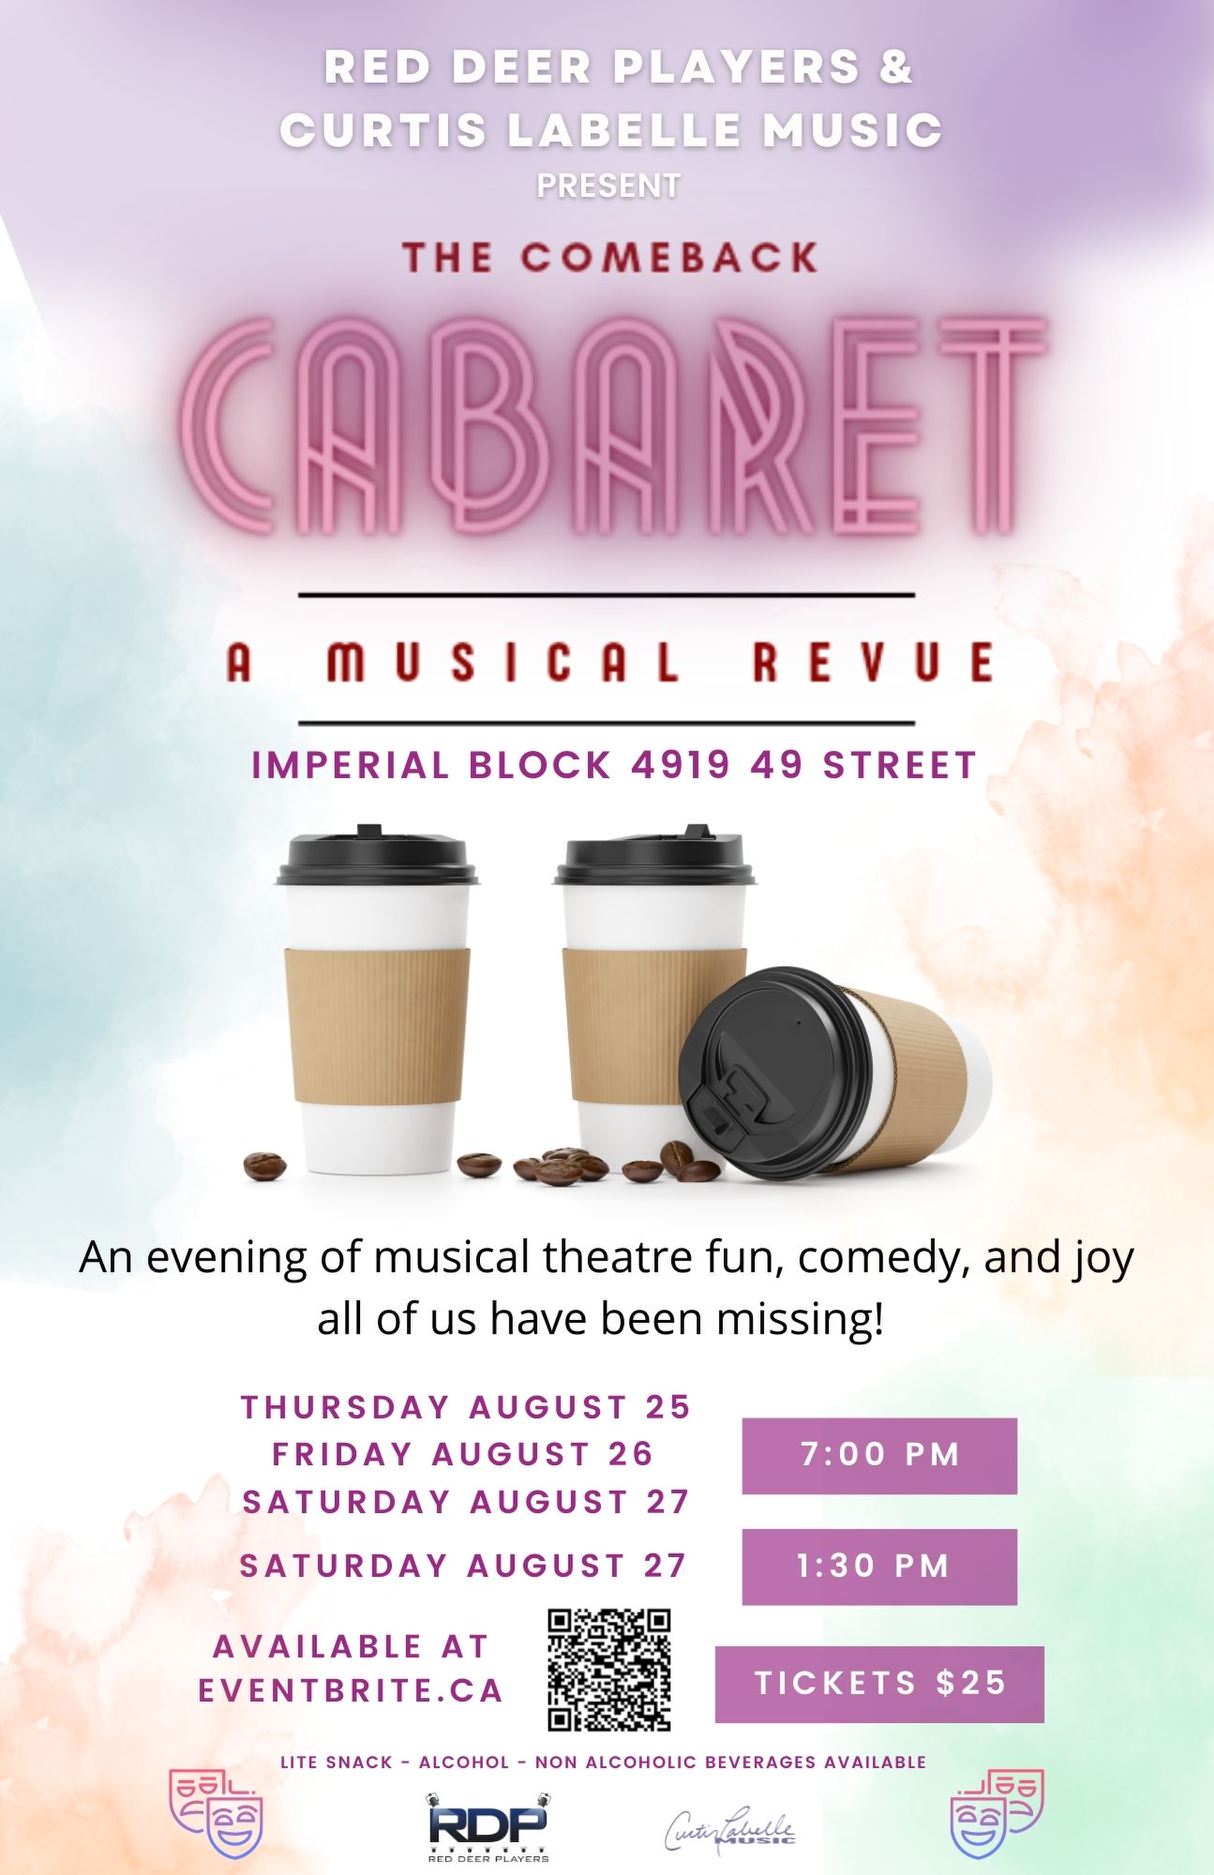 The Comeback Cabaret - A Musical Review